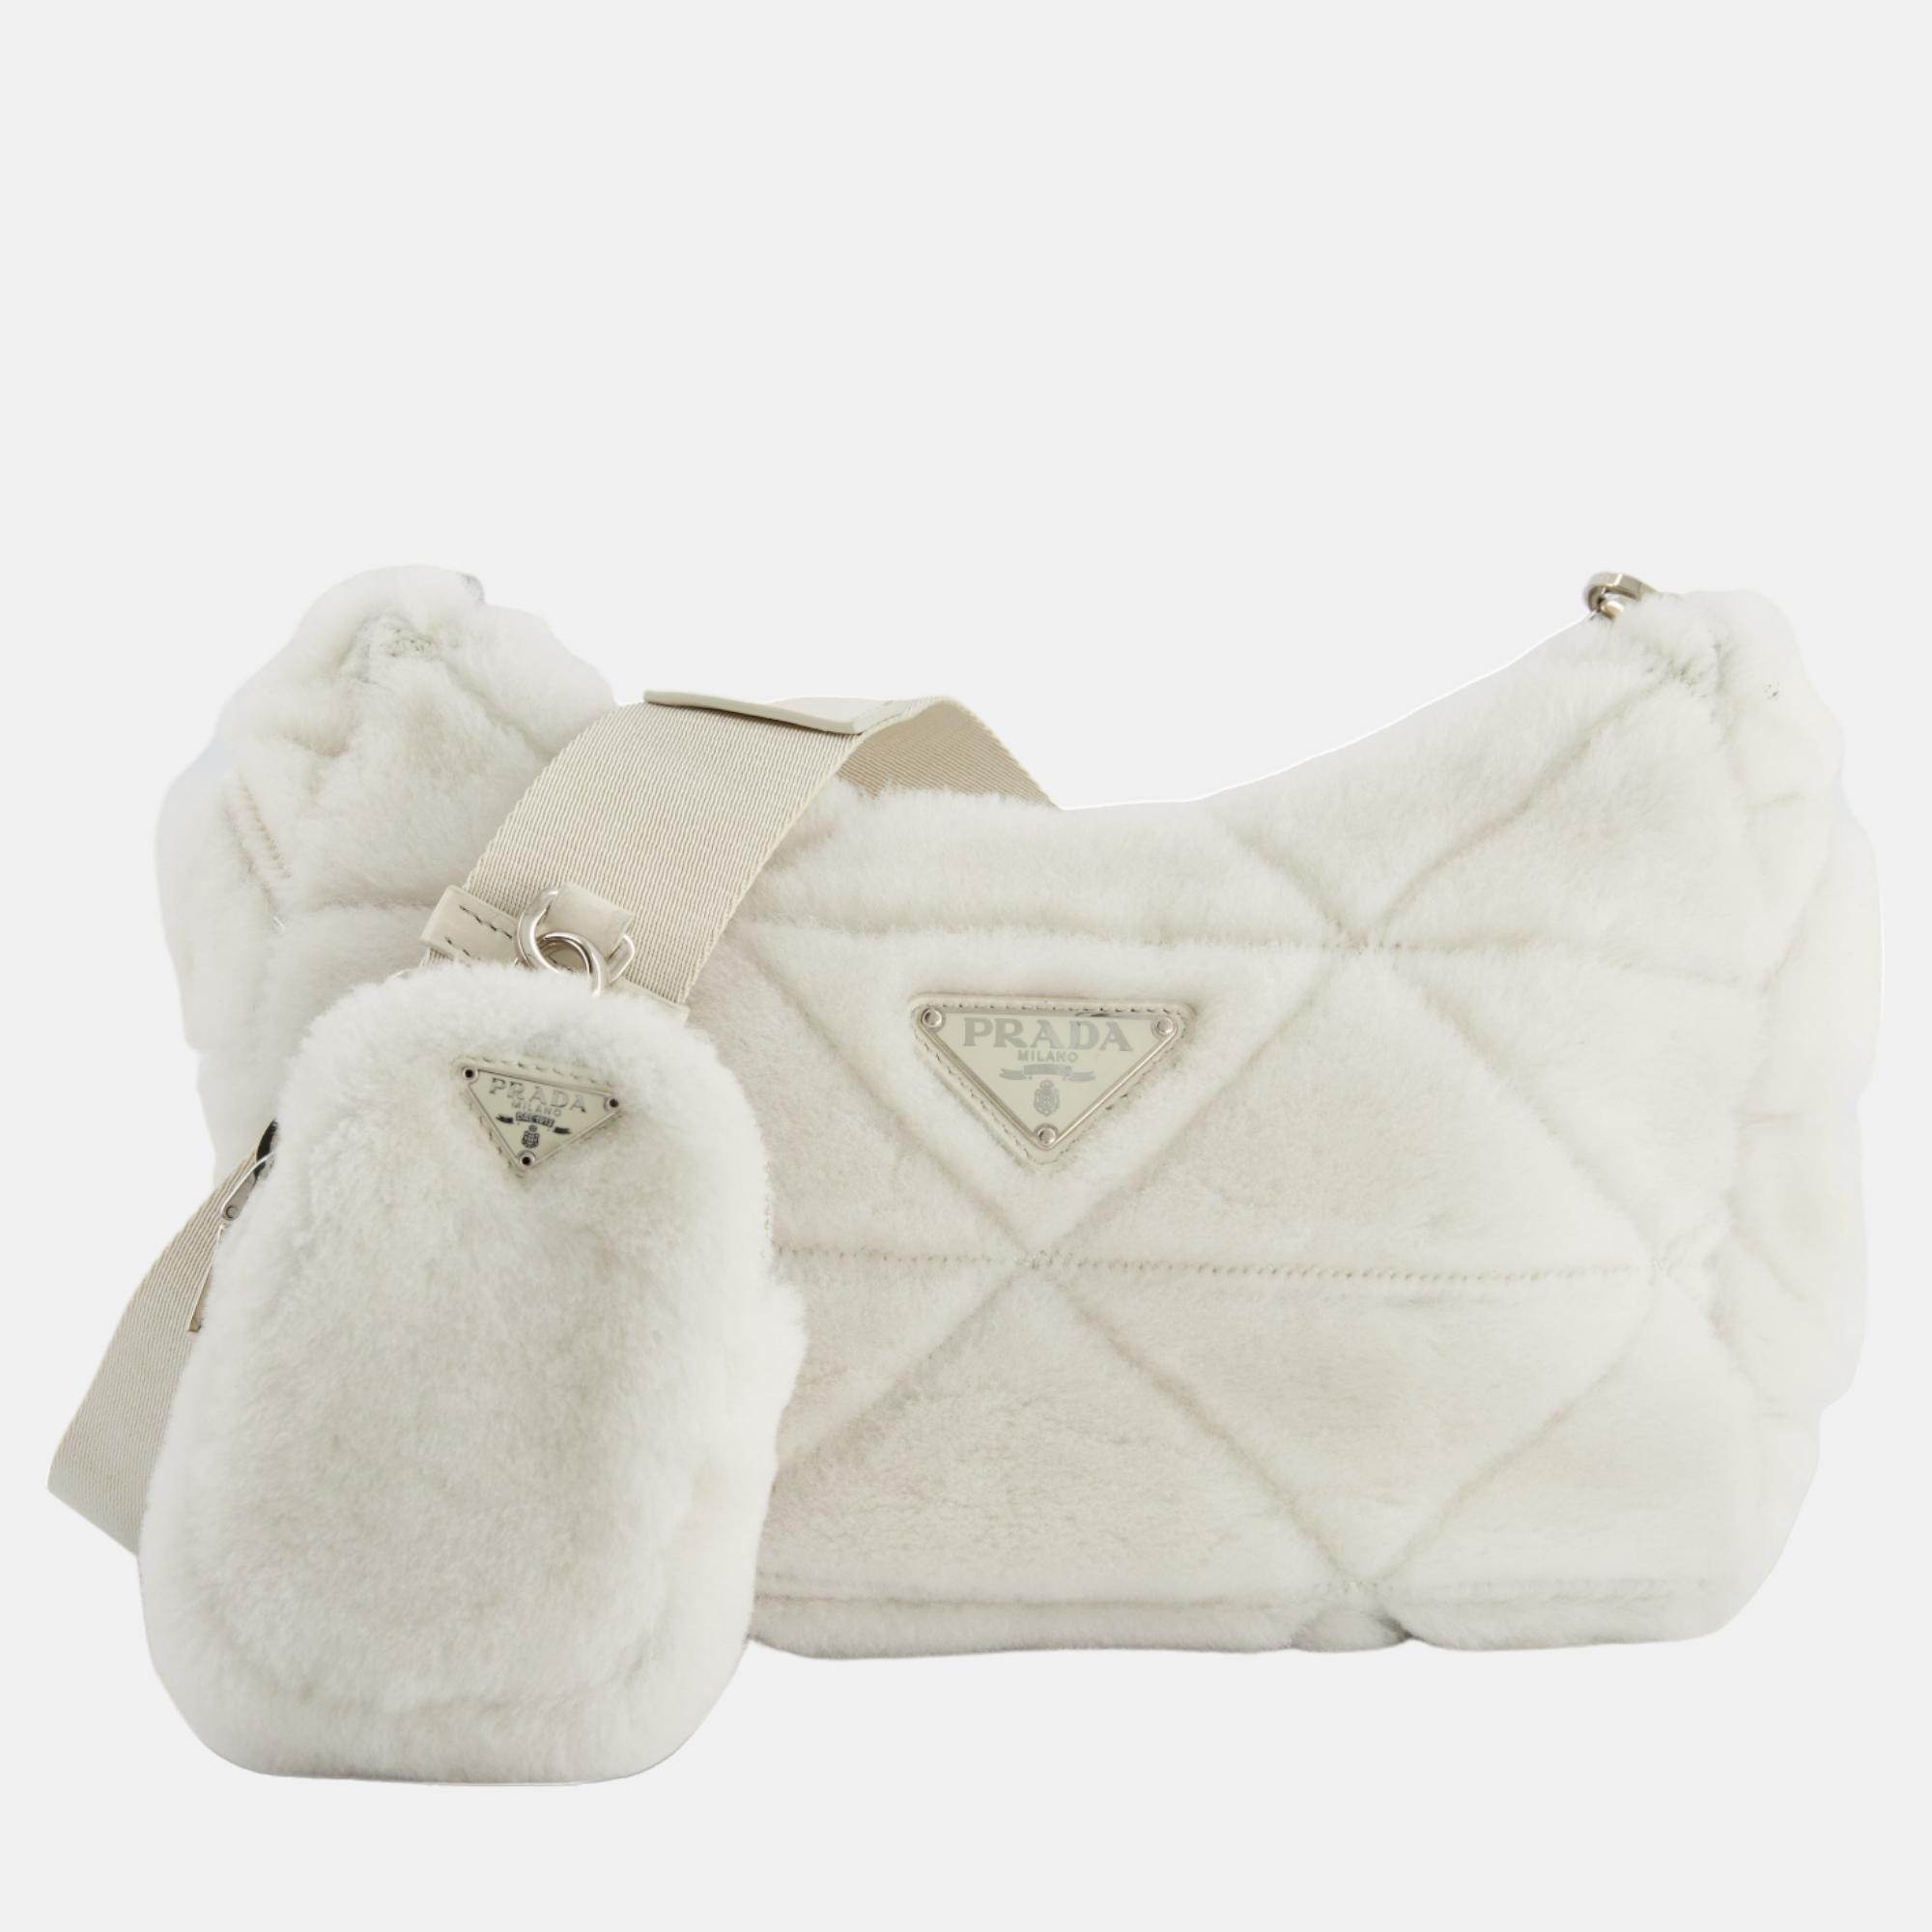 Prada Off-White Re-Edition 2000 Quilted Shearling Shoulder Bag With Silver Hardware